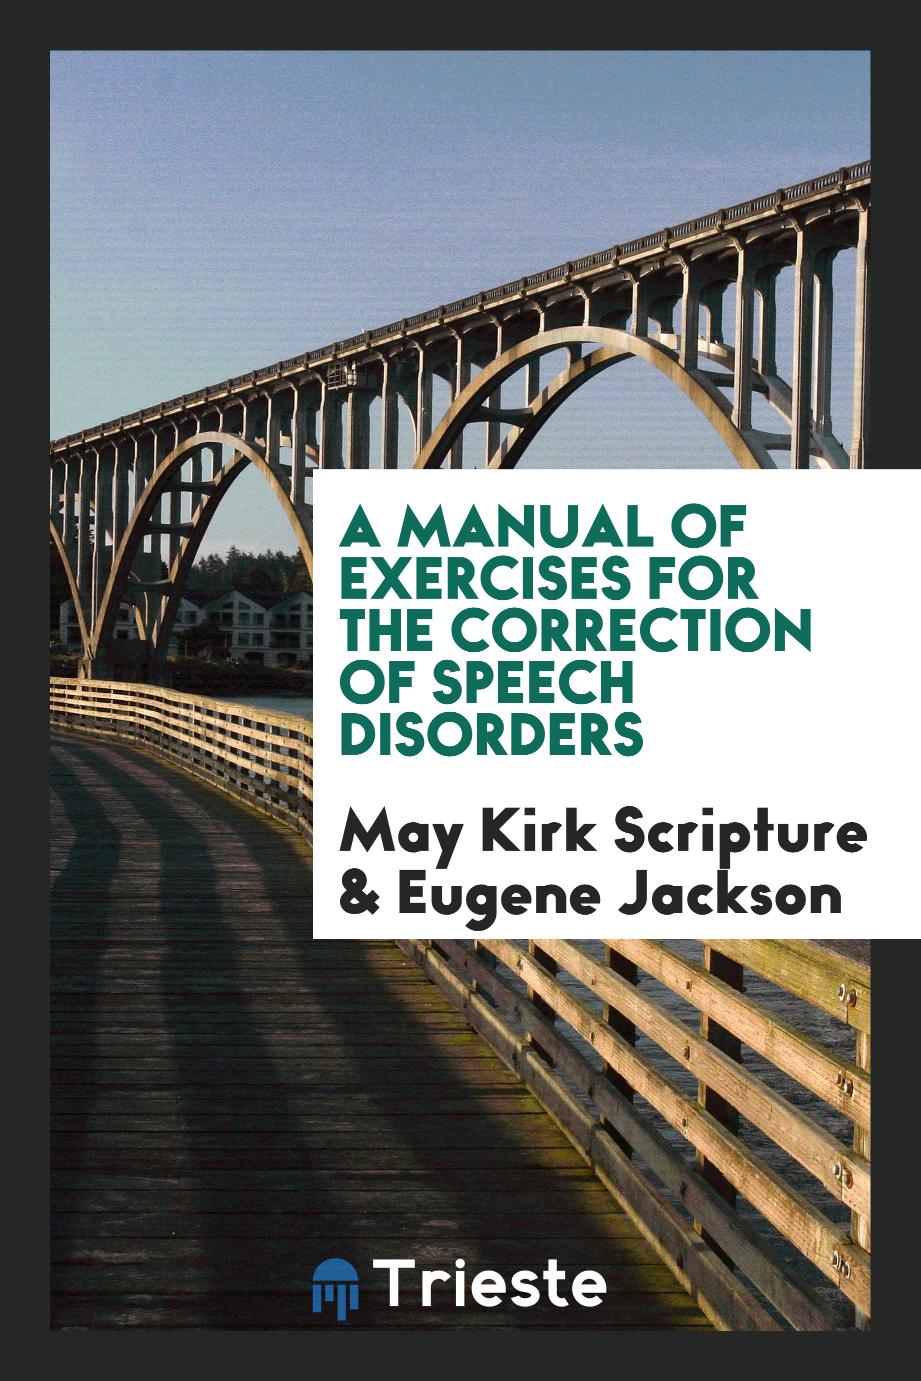 A manual of exercises for the correction of speech disorders